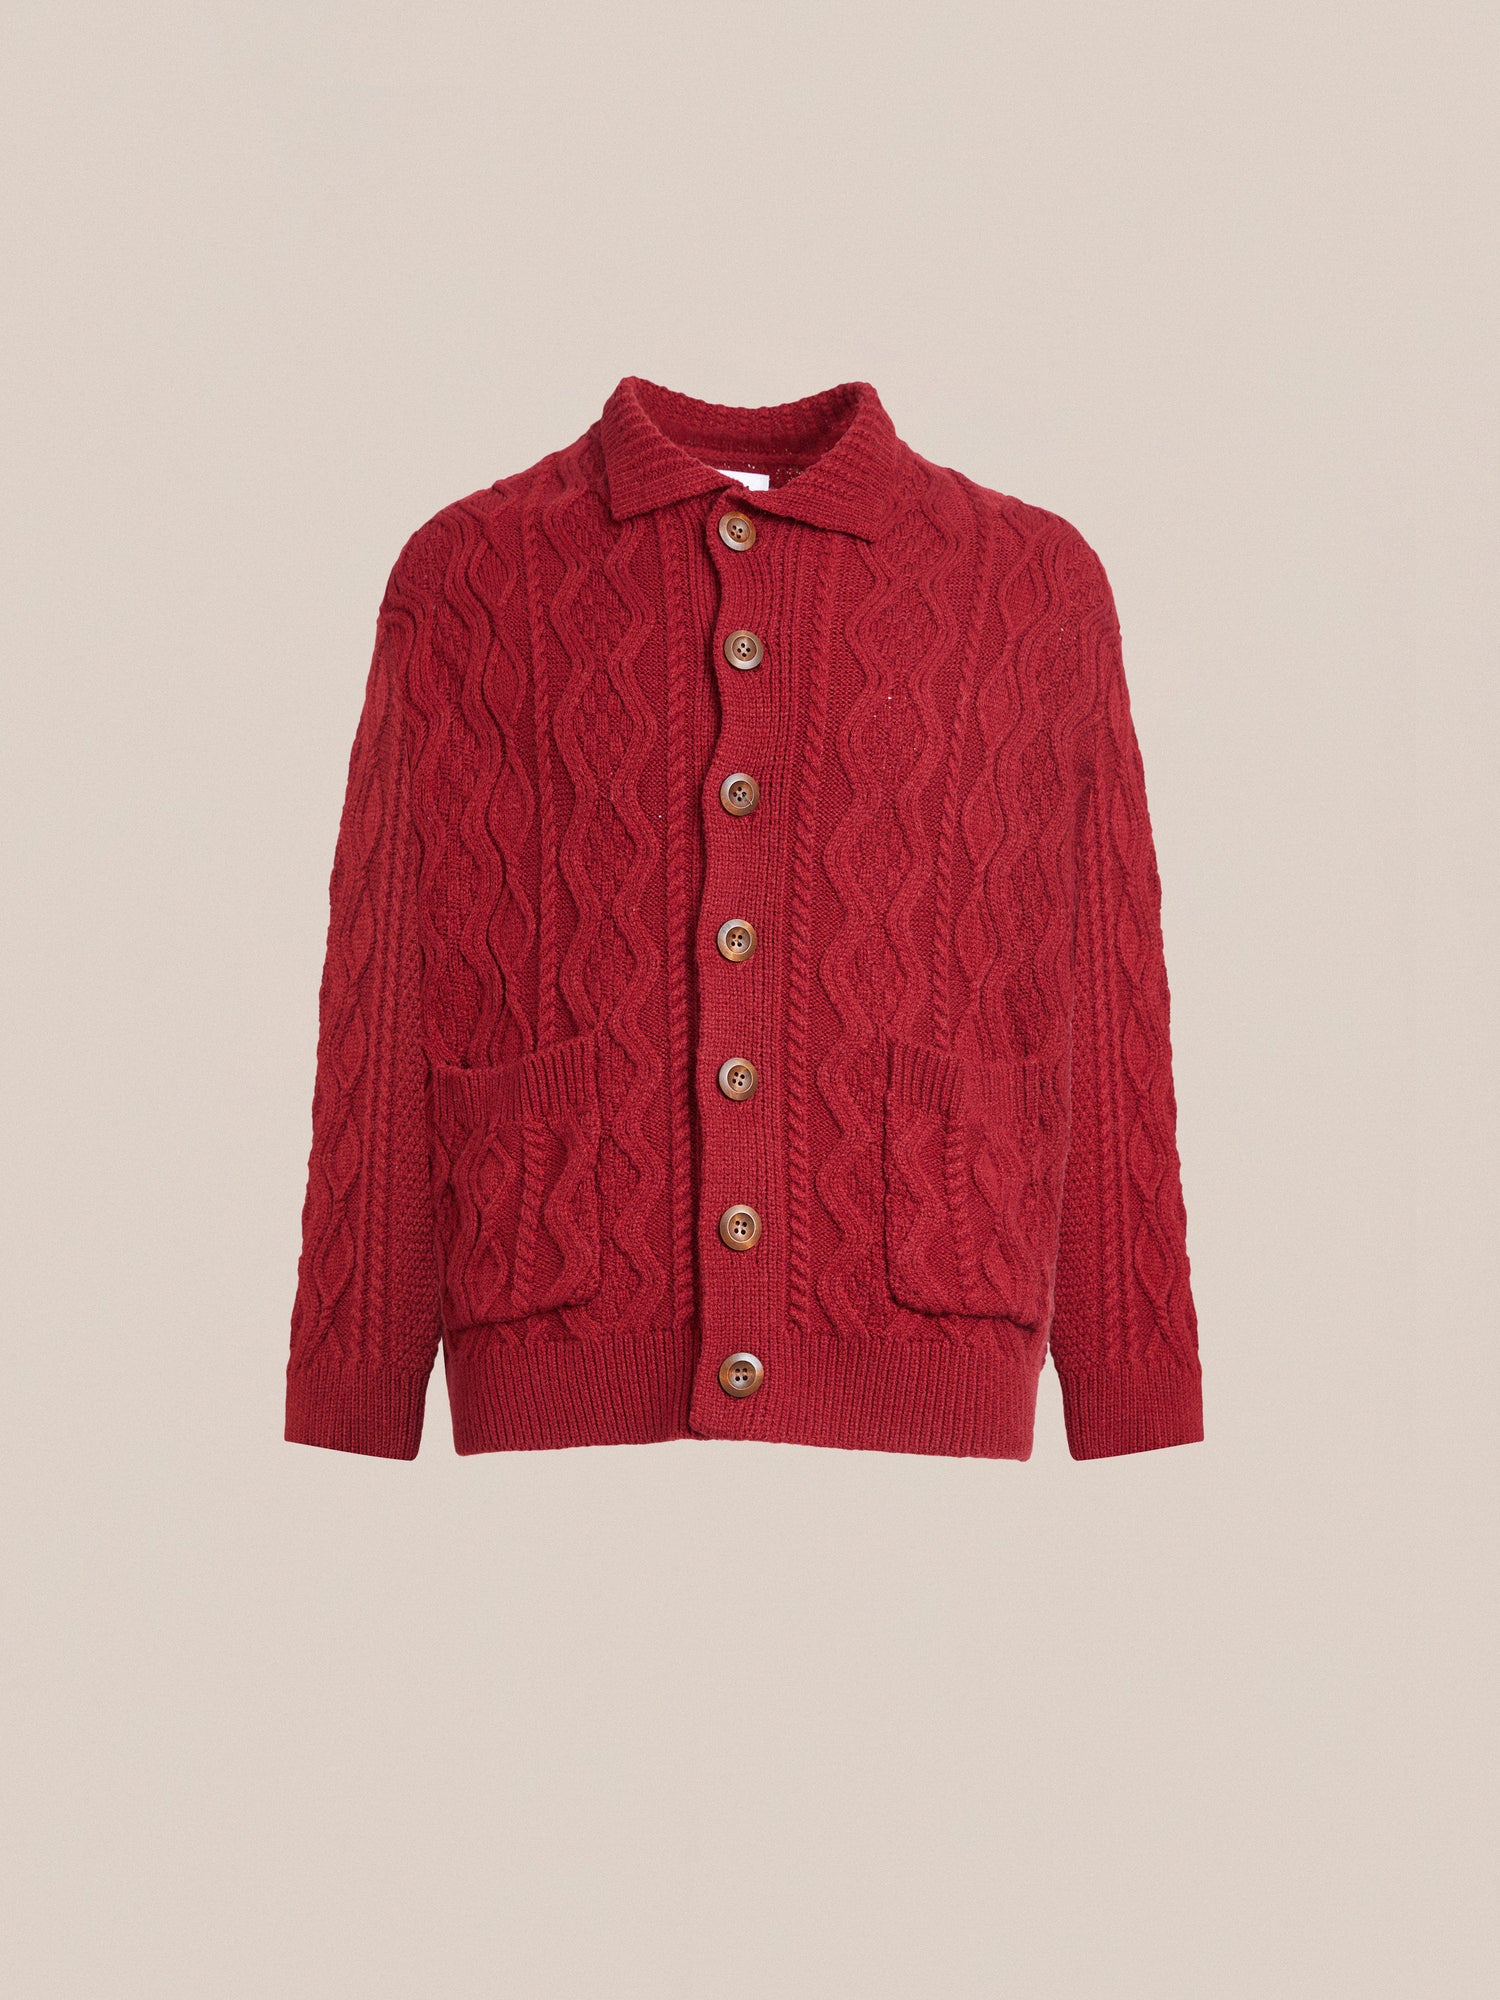 A Found Parsidan cable knit cardigan with buttons.